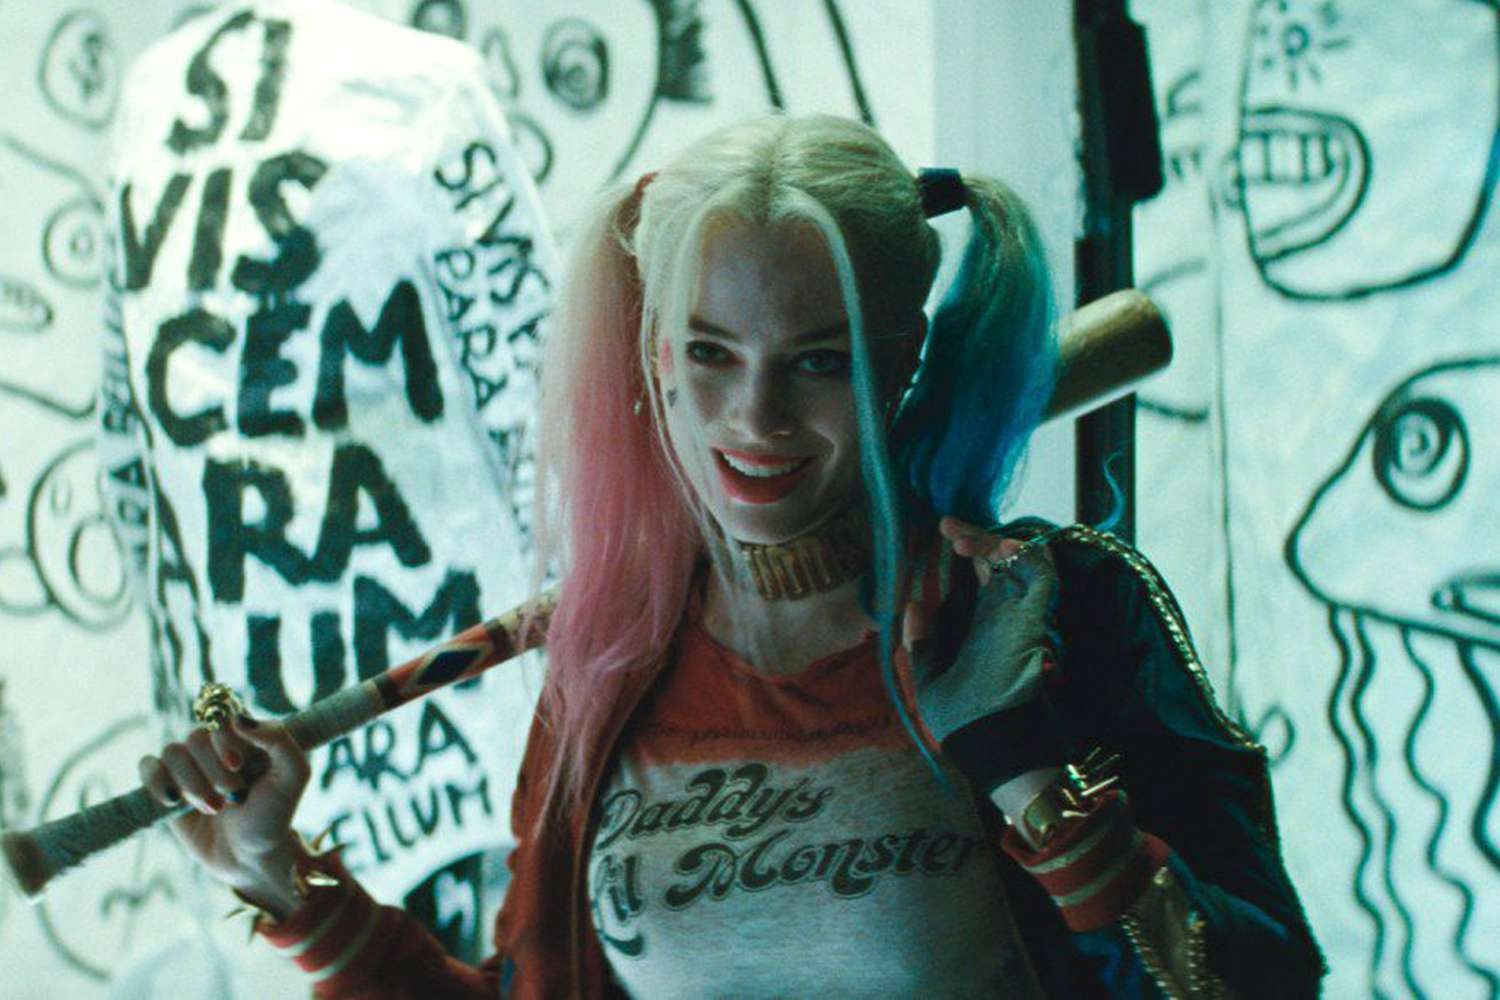 Margot Robbie smiling while portraying her role as Harley Quinn